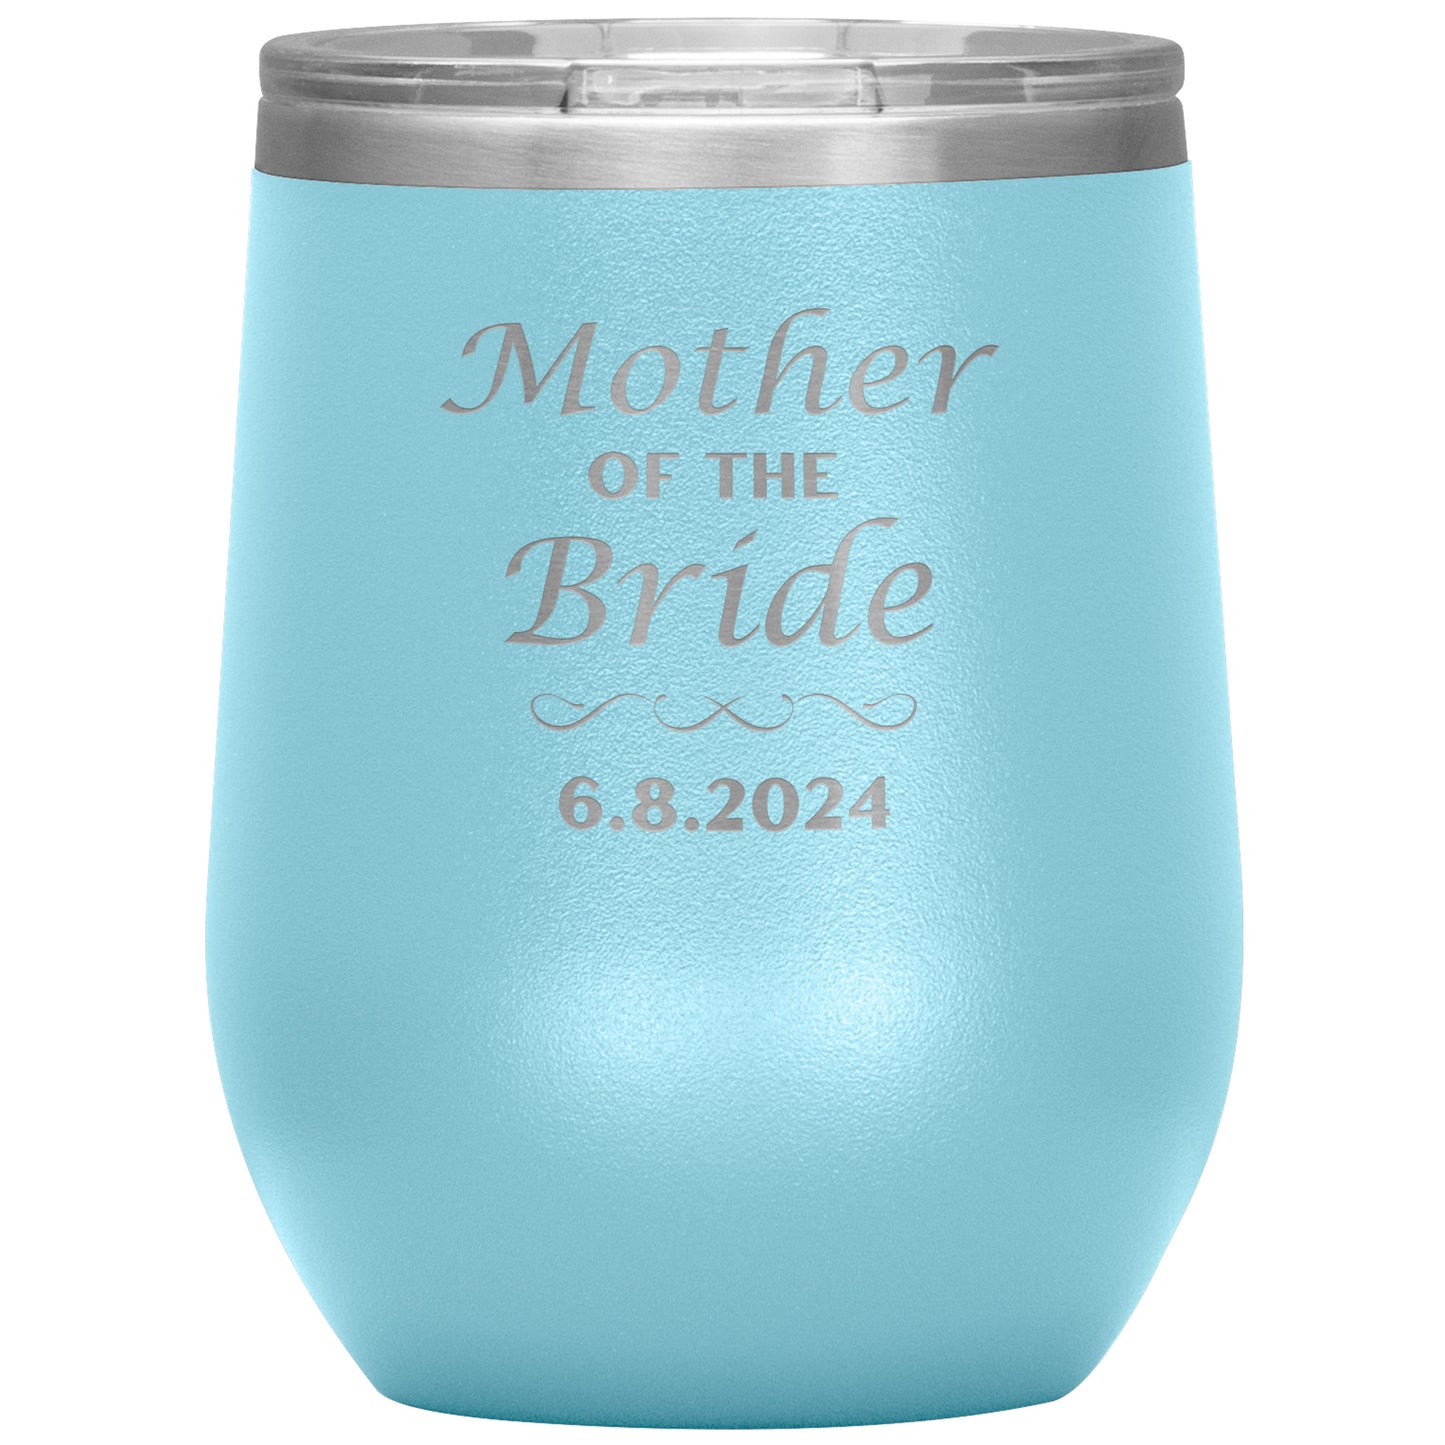 Mother of the Bride Wine Tumbler